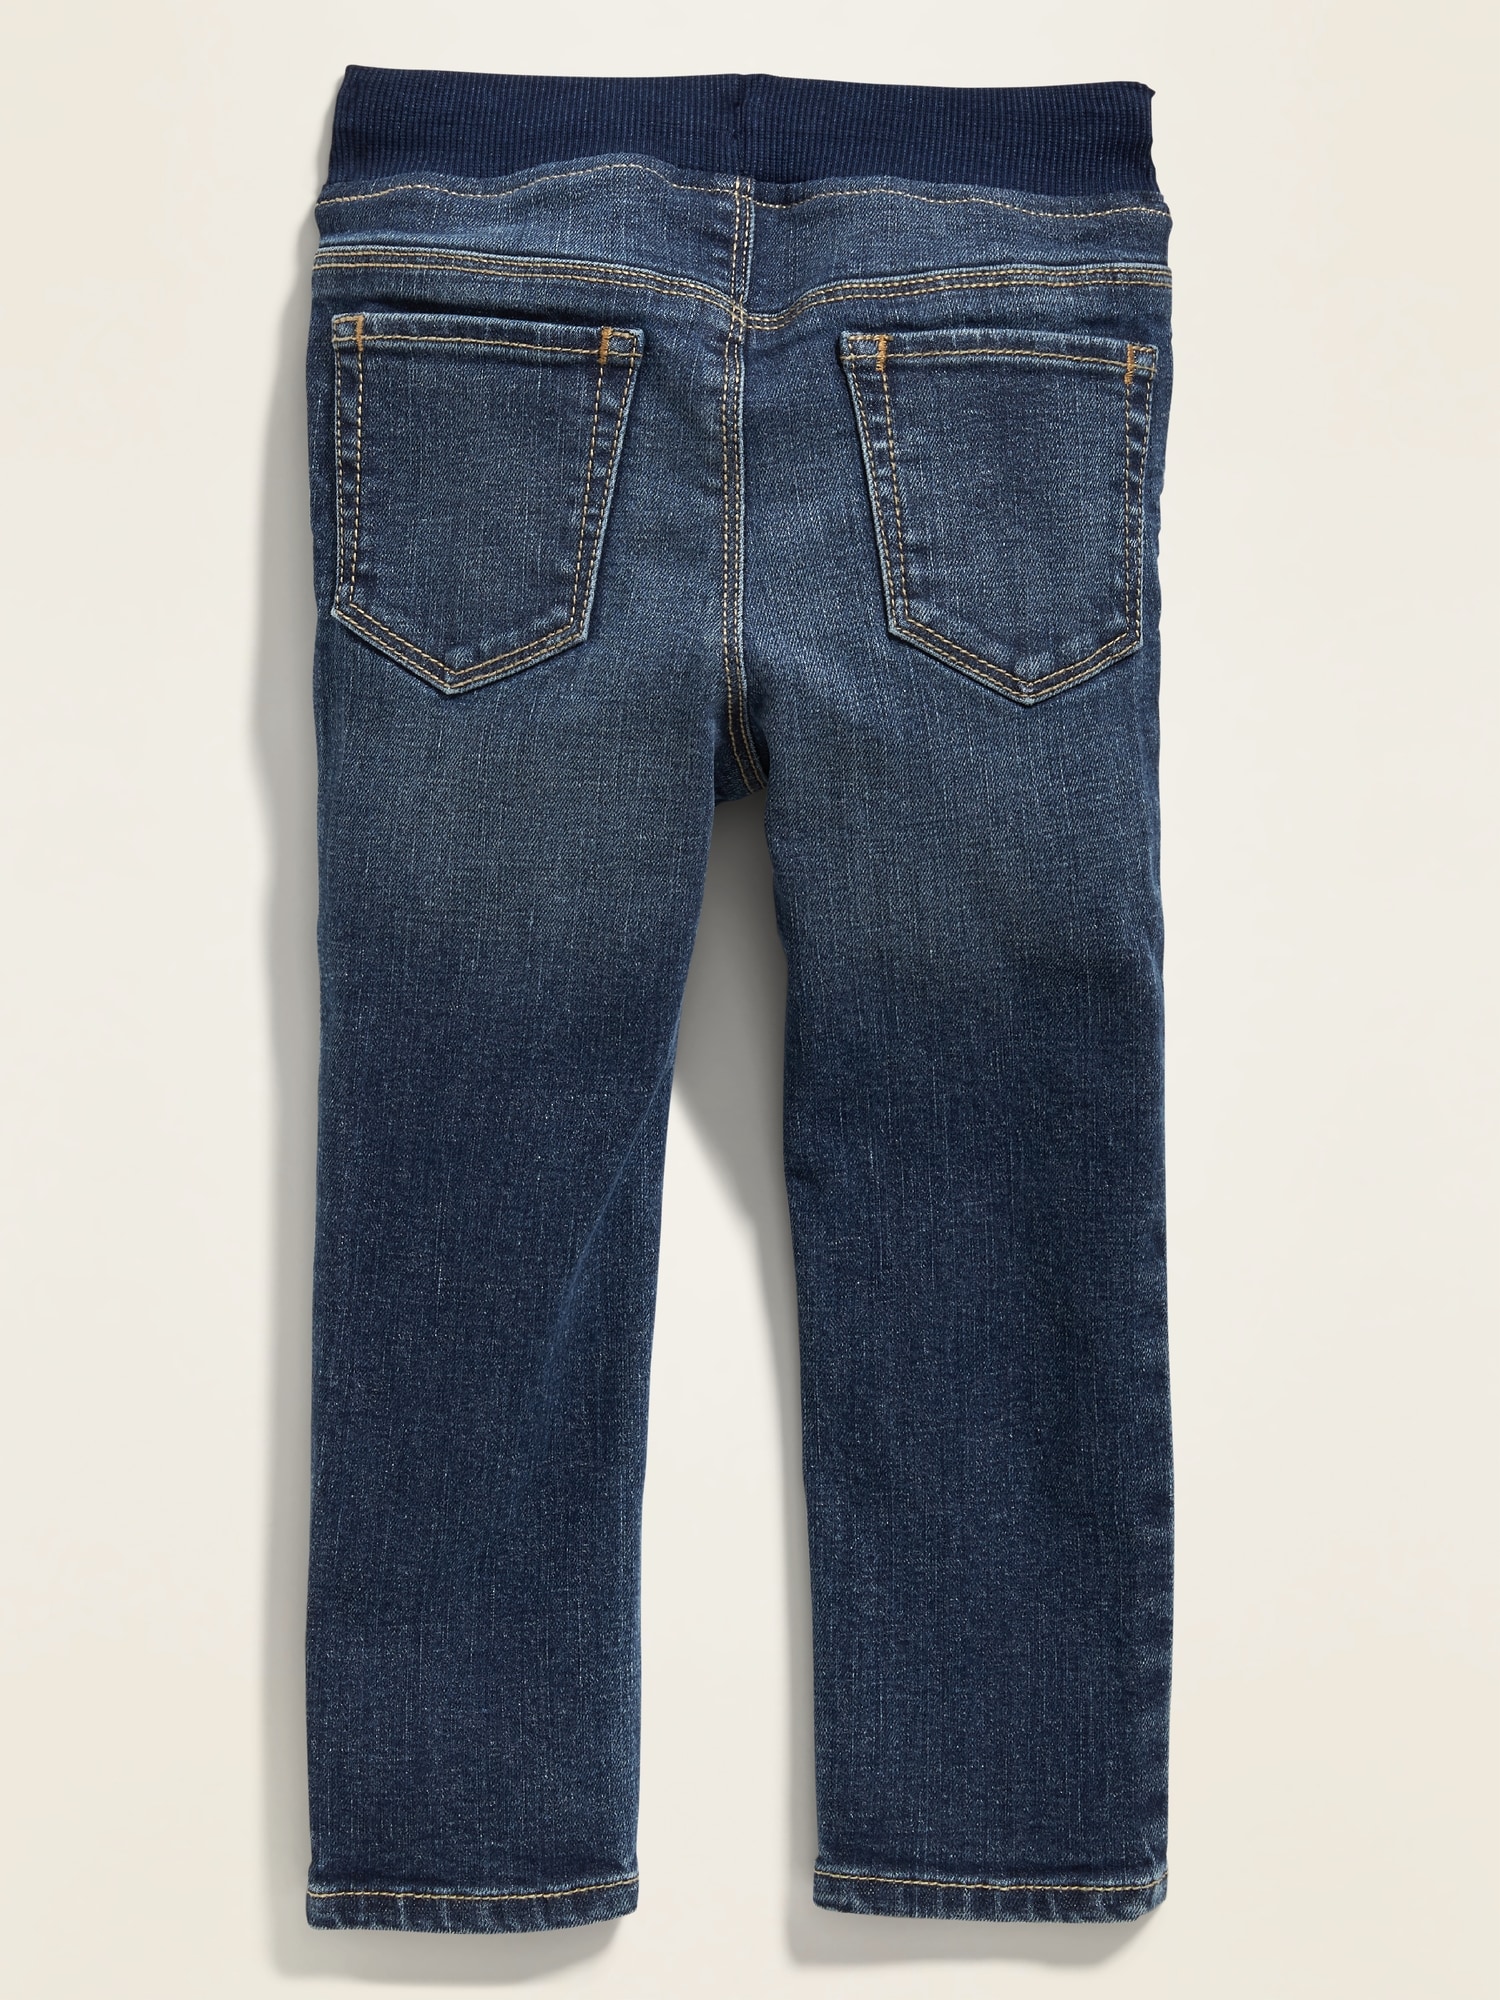 distressed jeans for toddlers